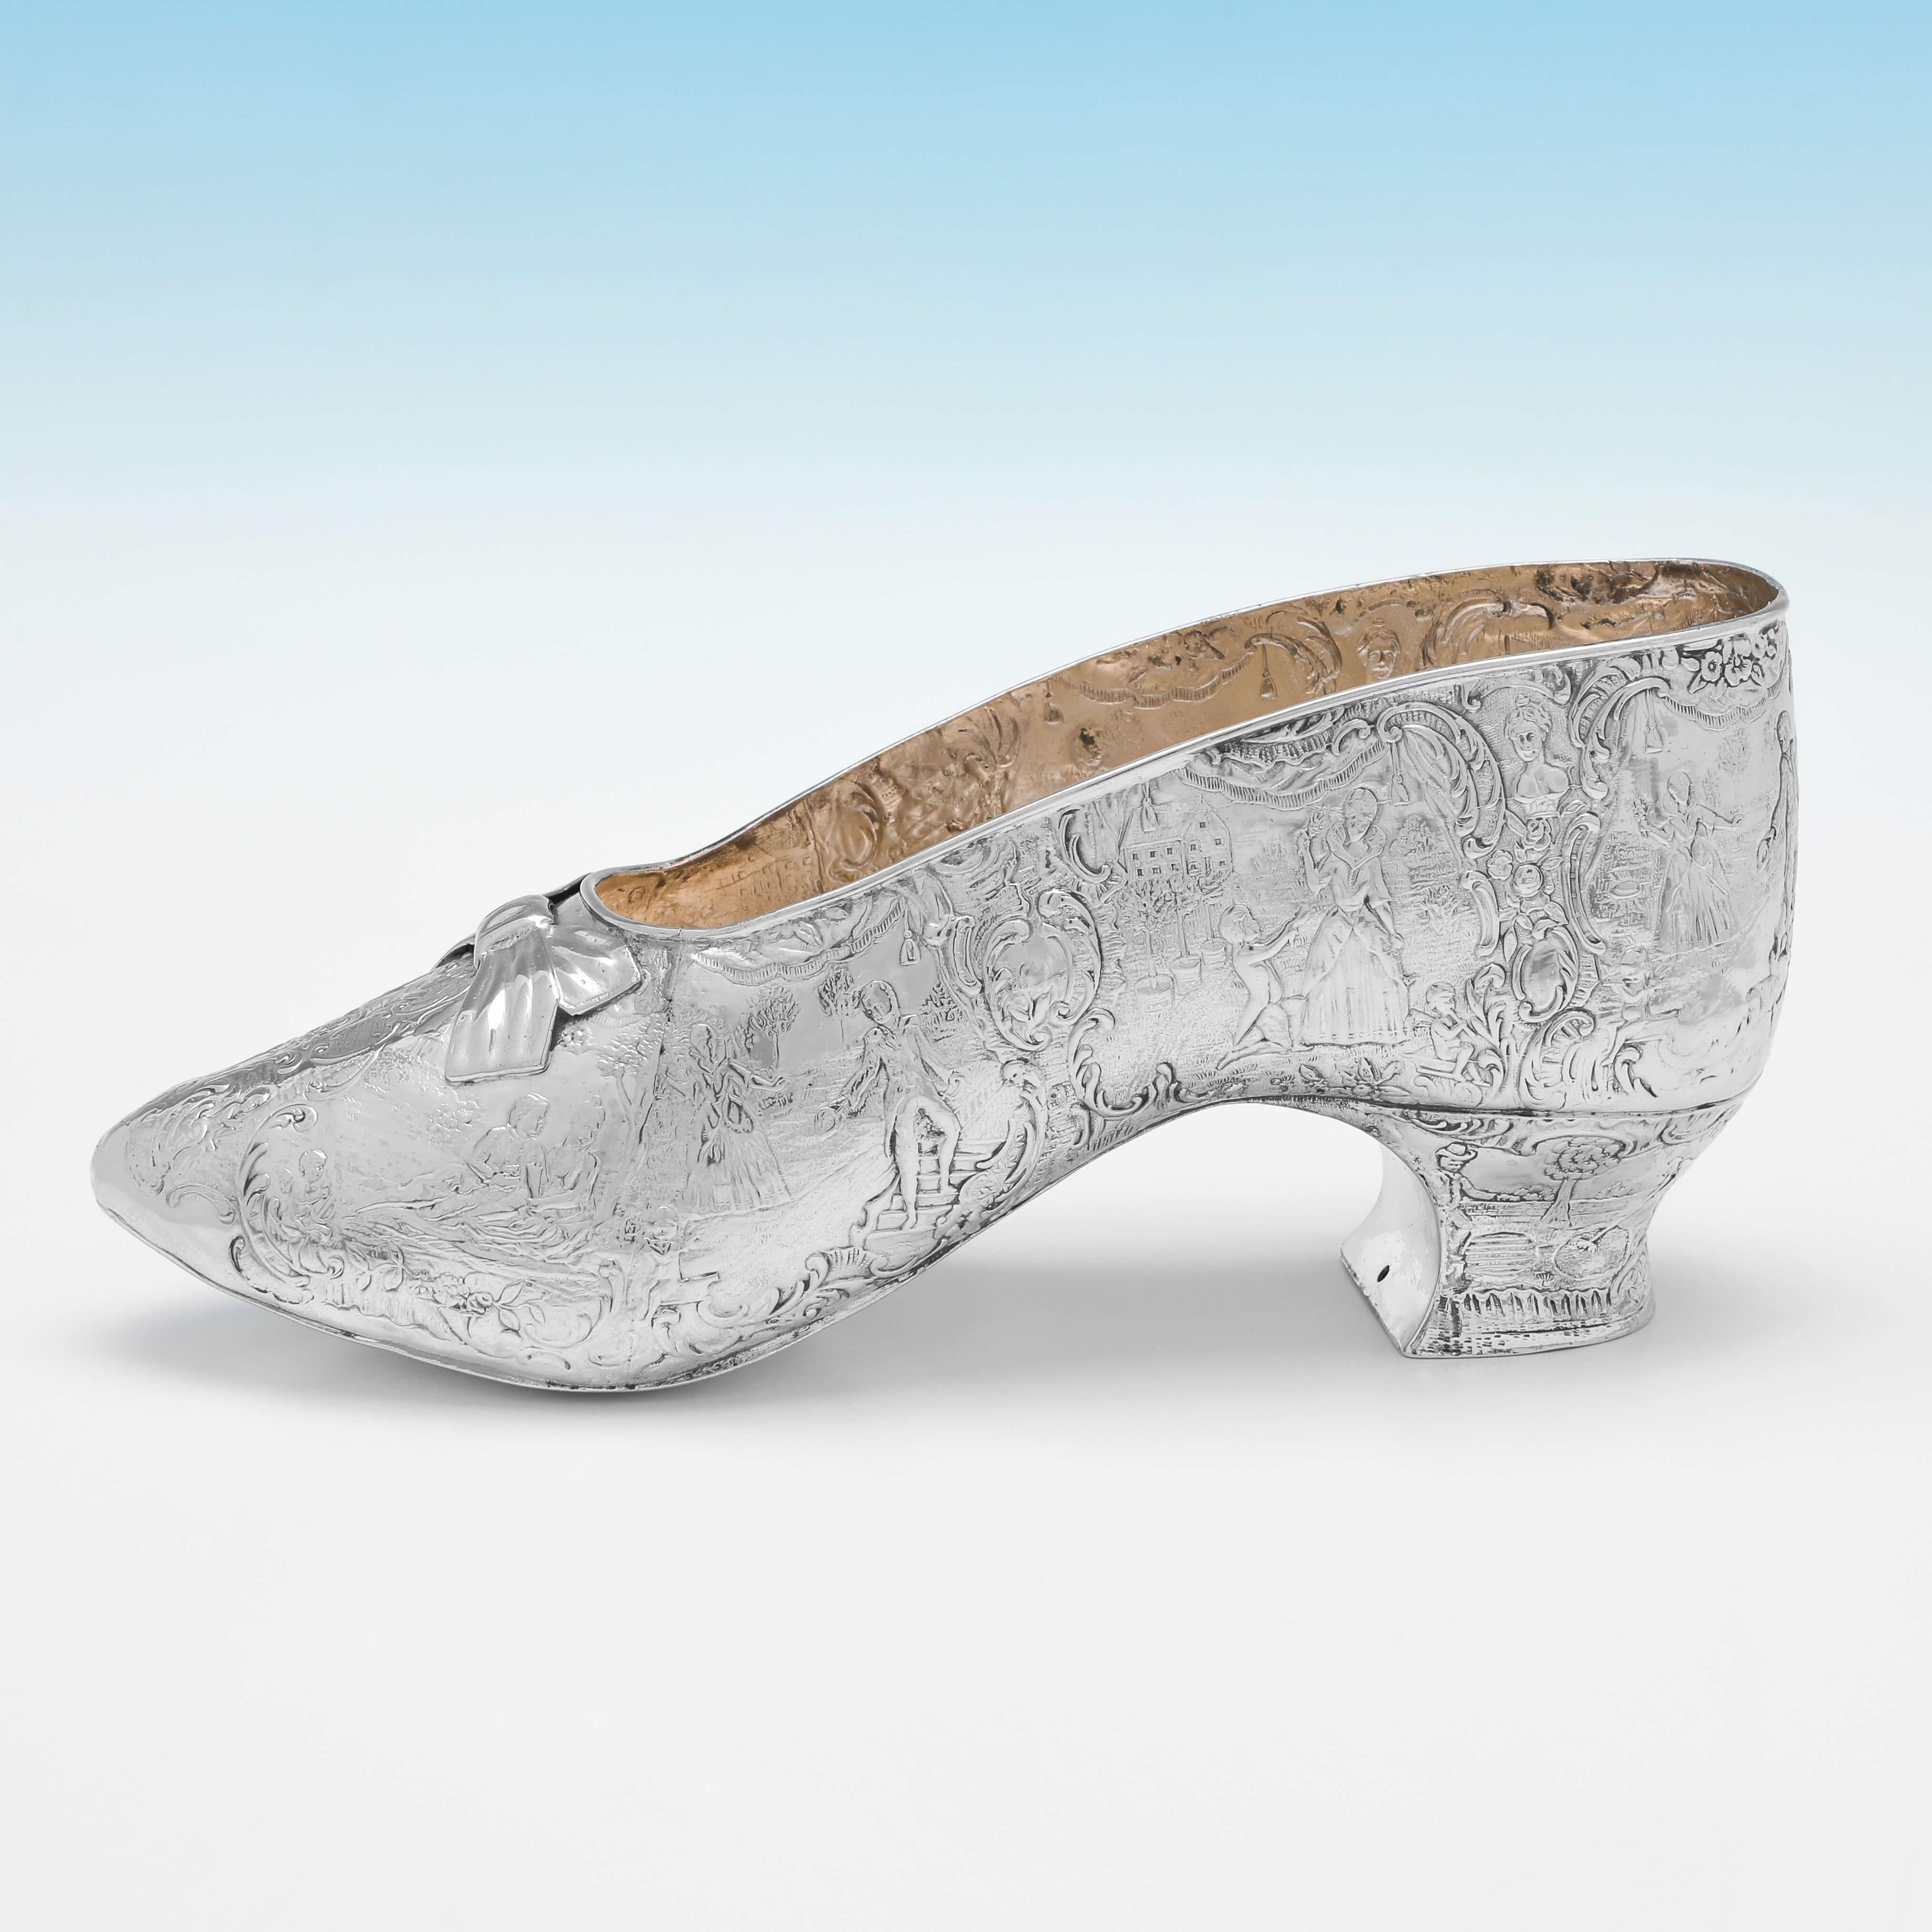 Carrying import marks for London in 1893 by Thomas Goodfellow, this charming, Victorian, Antique, Sterling Silver Model of a Shoe, features a gilt interior, and wonderful chased decoration throughout. 

The shoe model measures 3.5